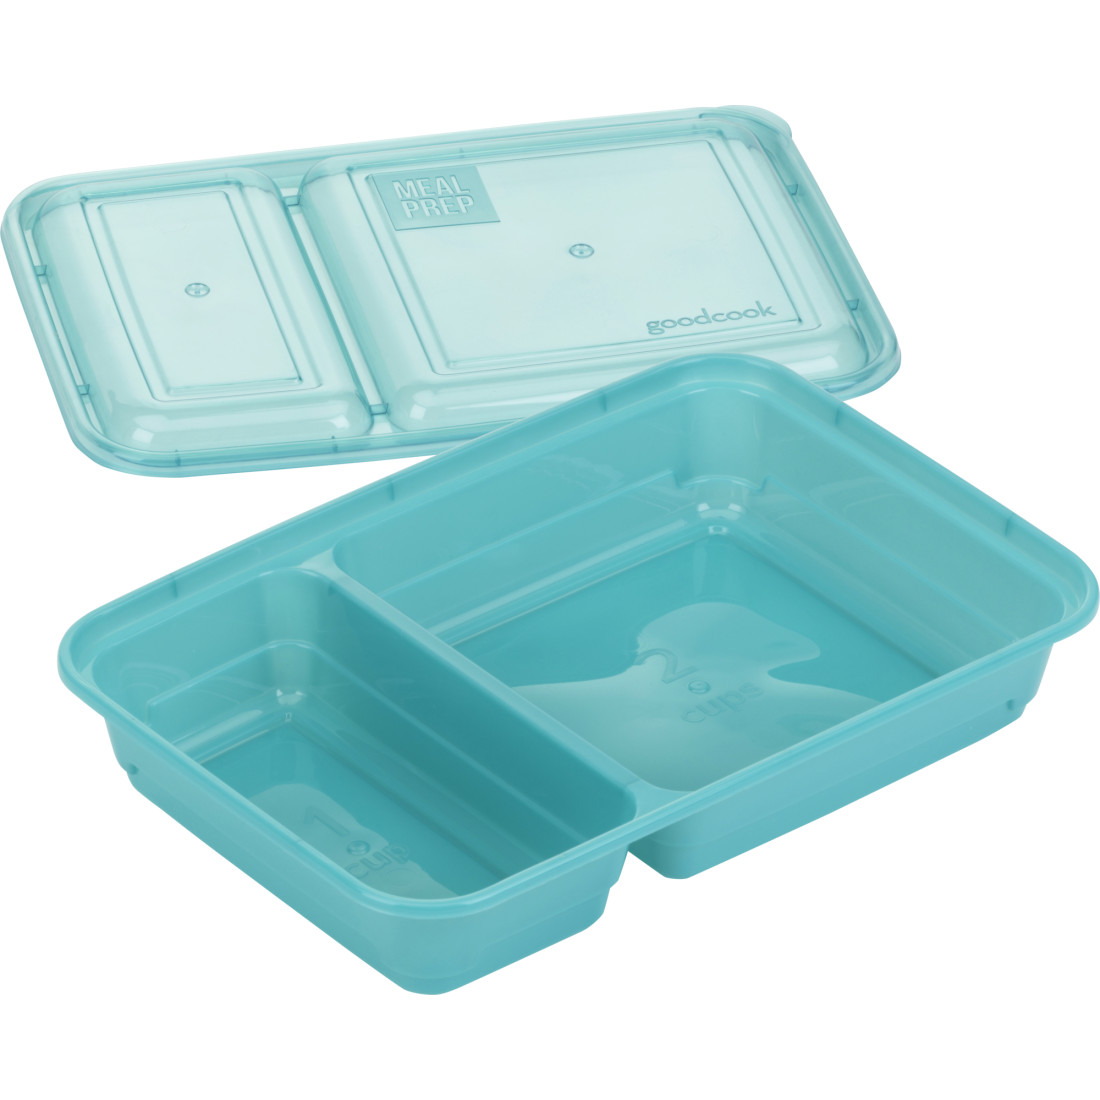 Good Cook Meal Prep, 2 Compartment BPA Free, Microwavable